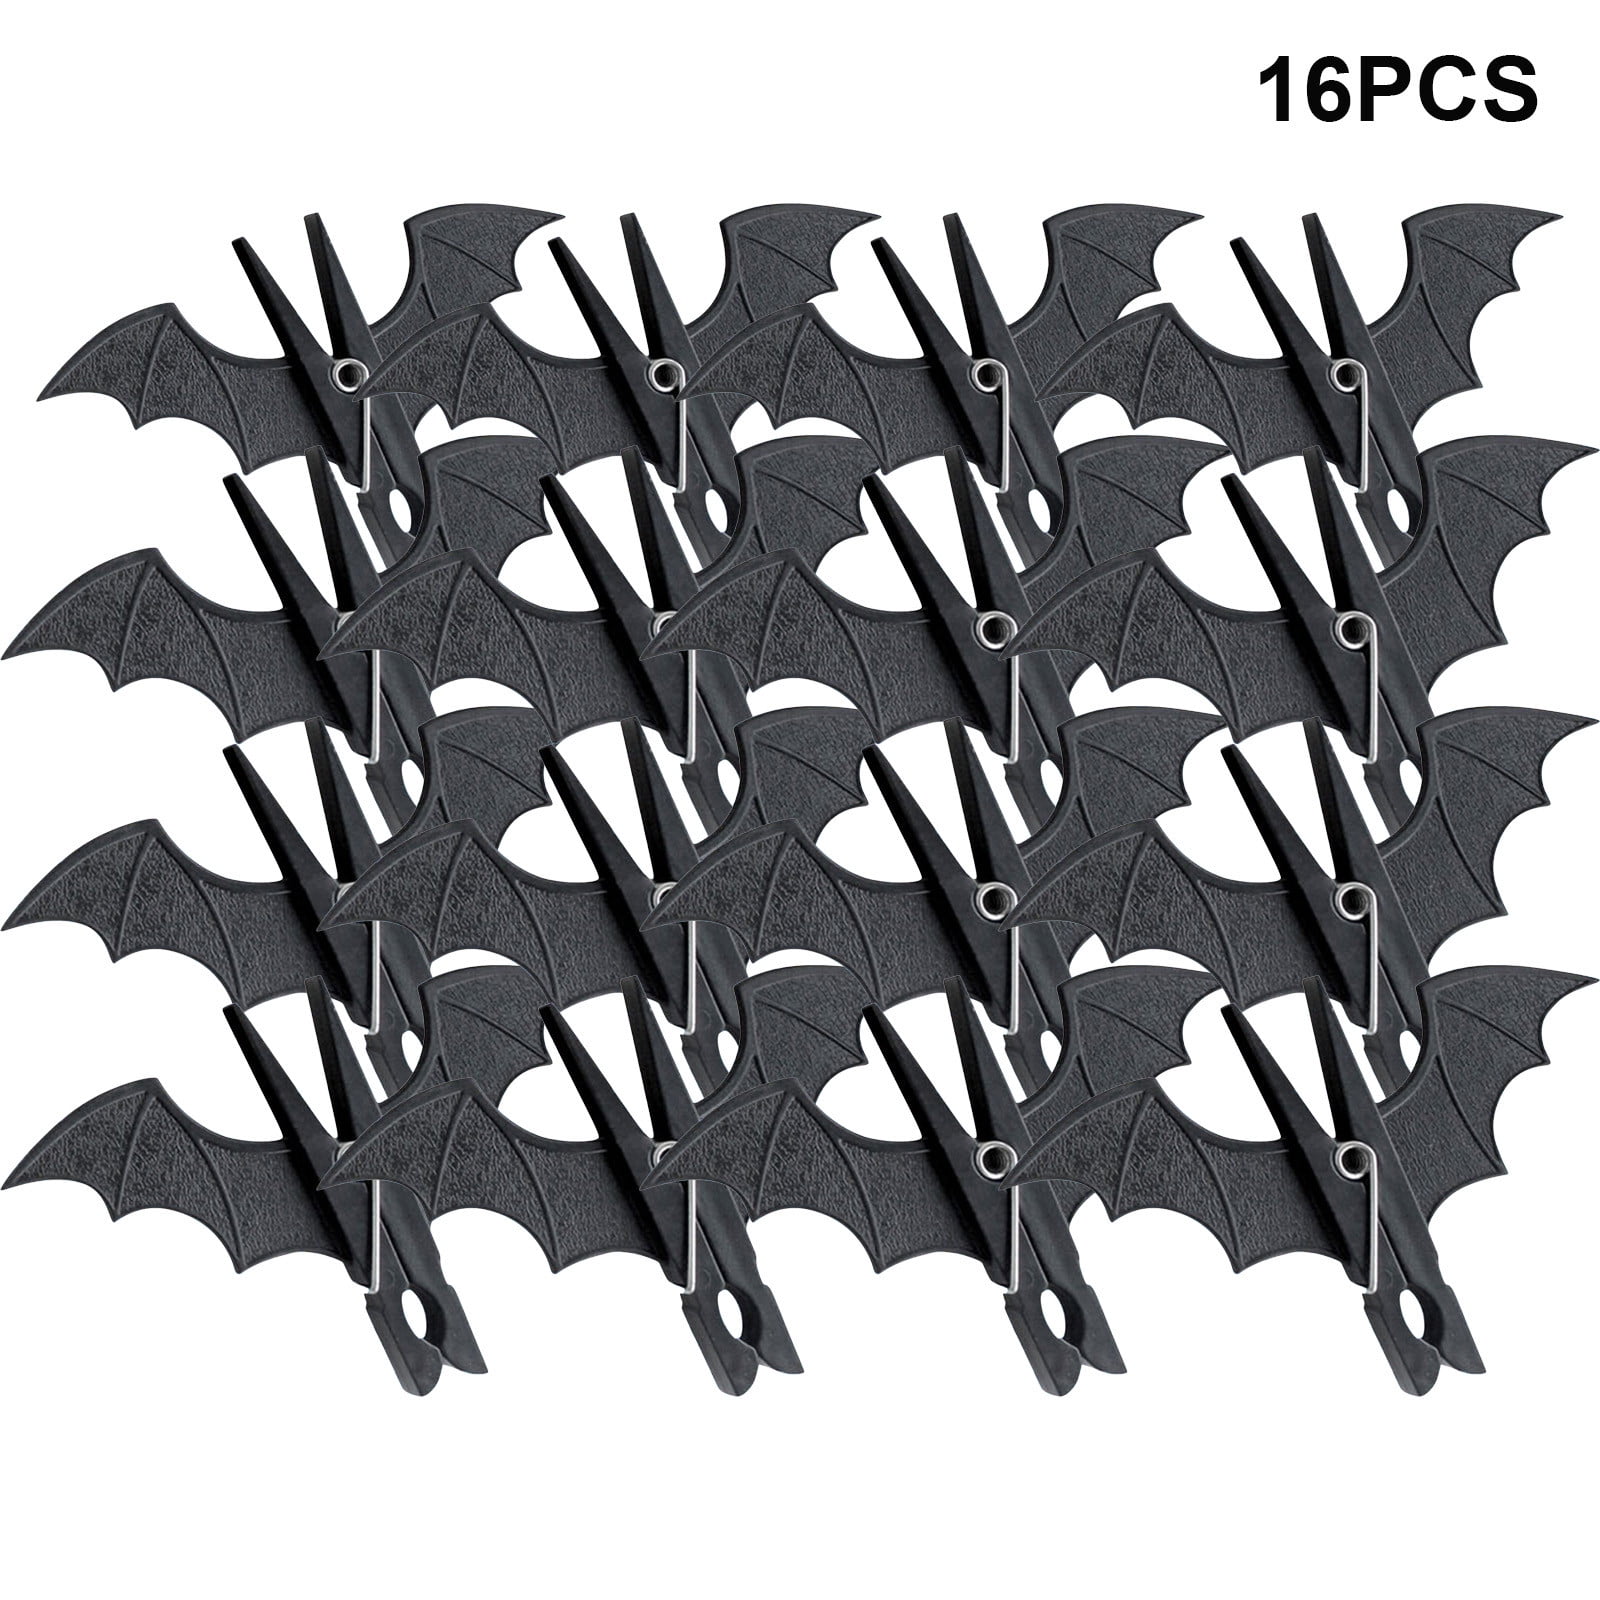 Li HB Store 16pcs Halloween Black Clothes Pins, Windproof Non-Slip  Clothesline Clips, Bats Clothes Clips, Black Plastic Clothespin For Hanging  Clothes Drying Outdoor,Home Improvement,Black 